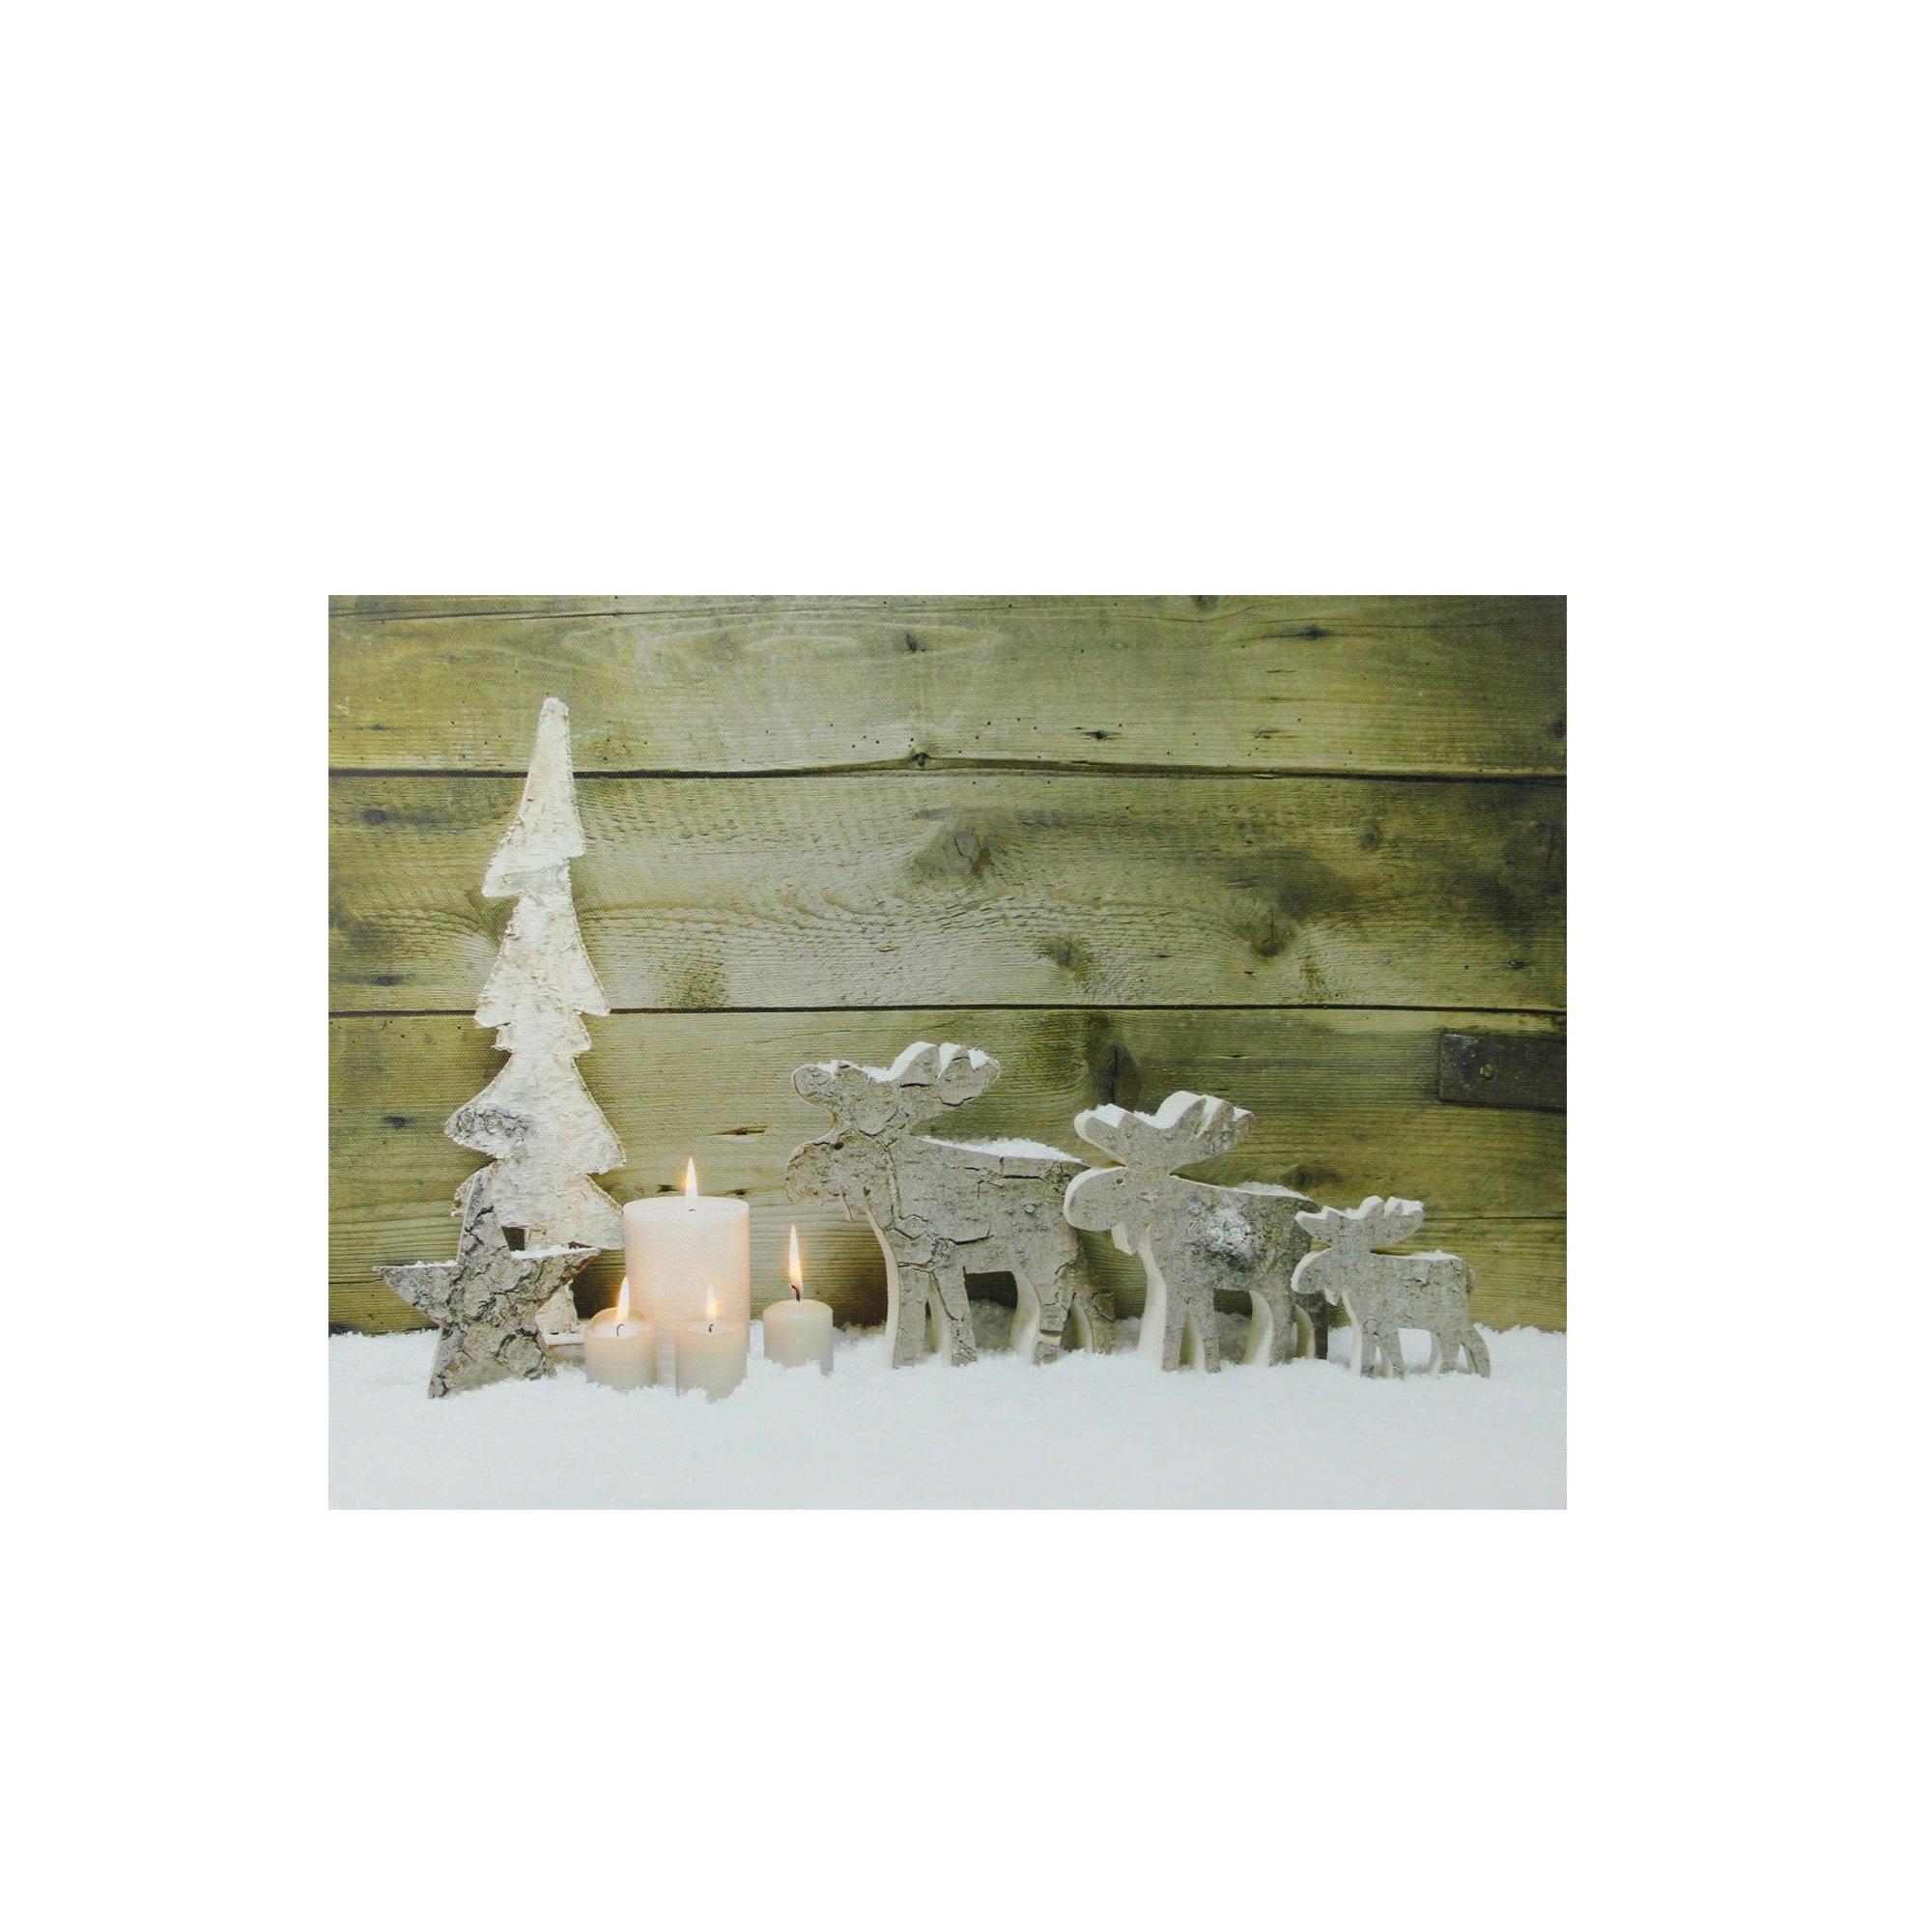 LED Lighted Flickering Candles And Winter Wooden Moose Canvas Wall Art